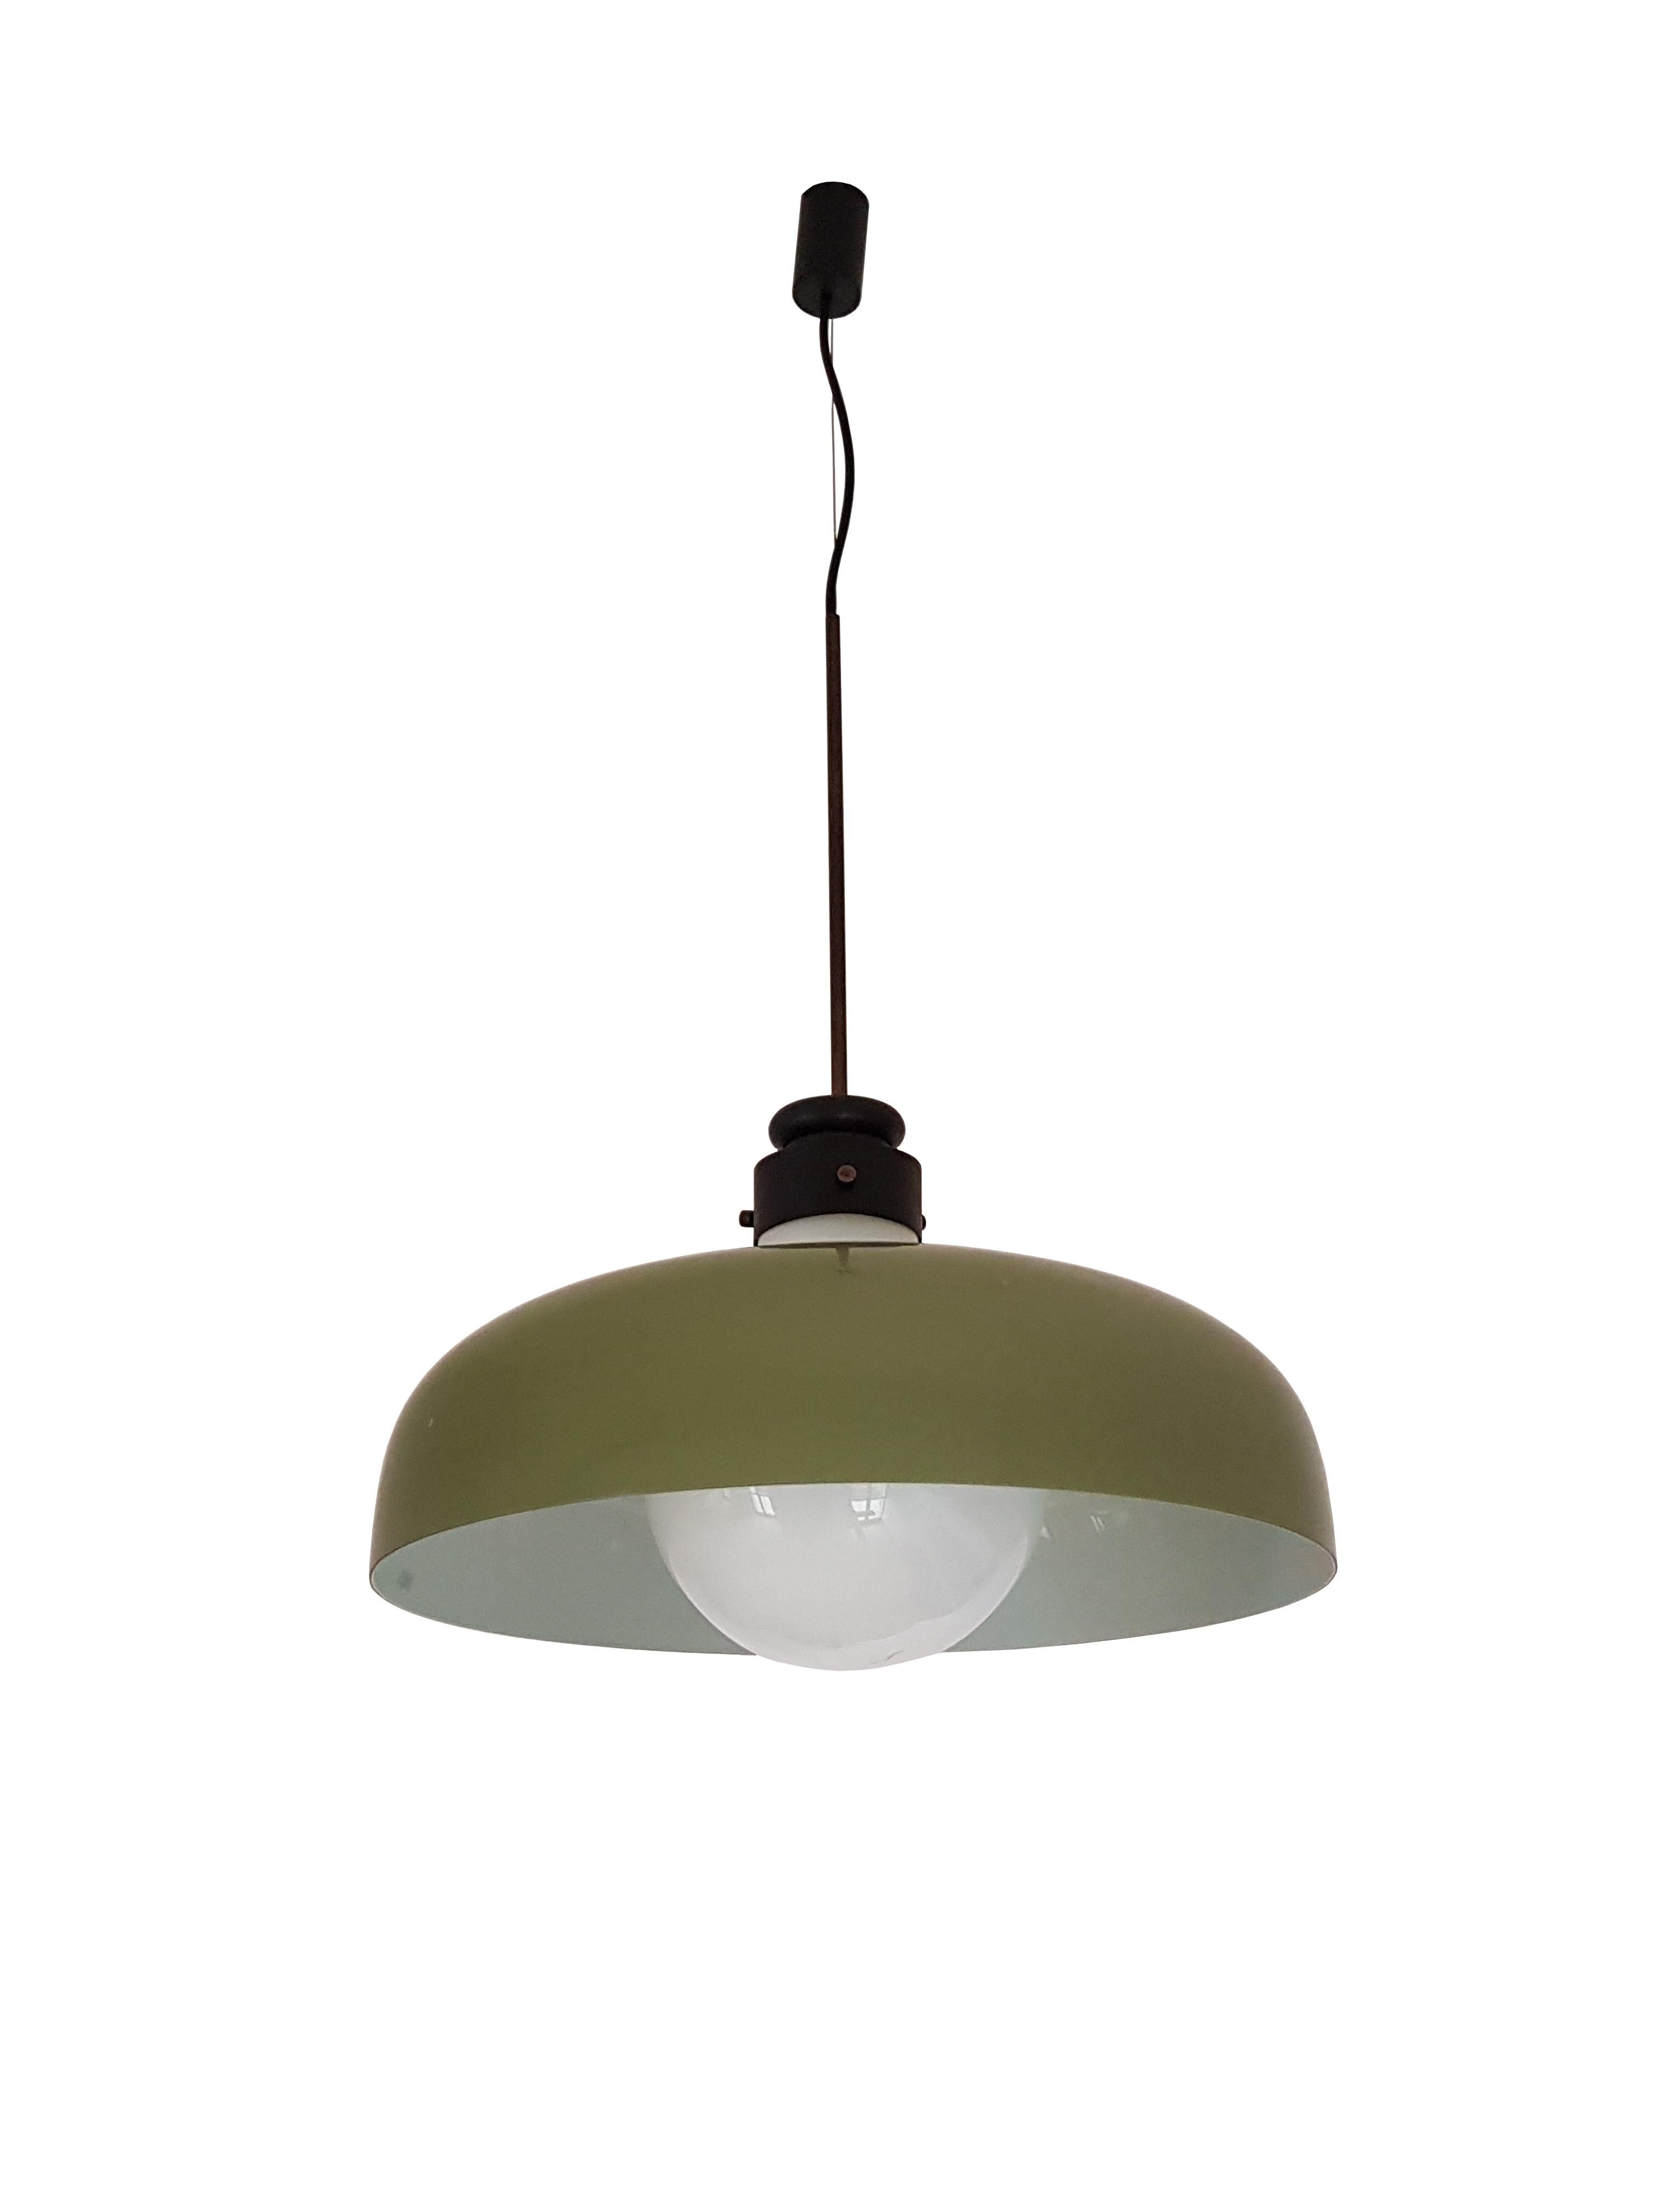 This elegant Murano pendant is composed by a simple painted structure and two handmade glass elements: an opaline spherical lamp shade and an “incamiciato” green round shade. Very good condition.